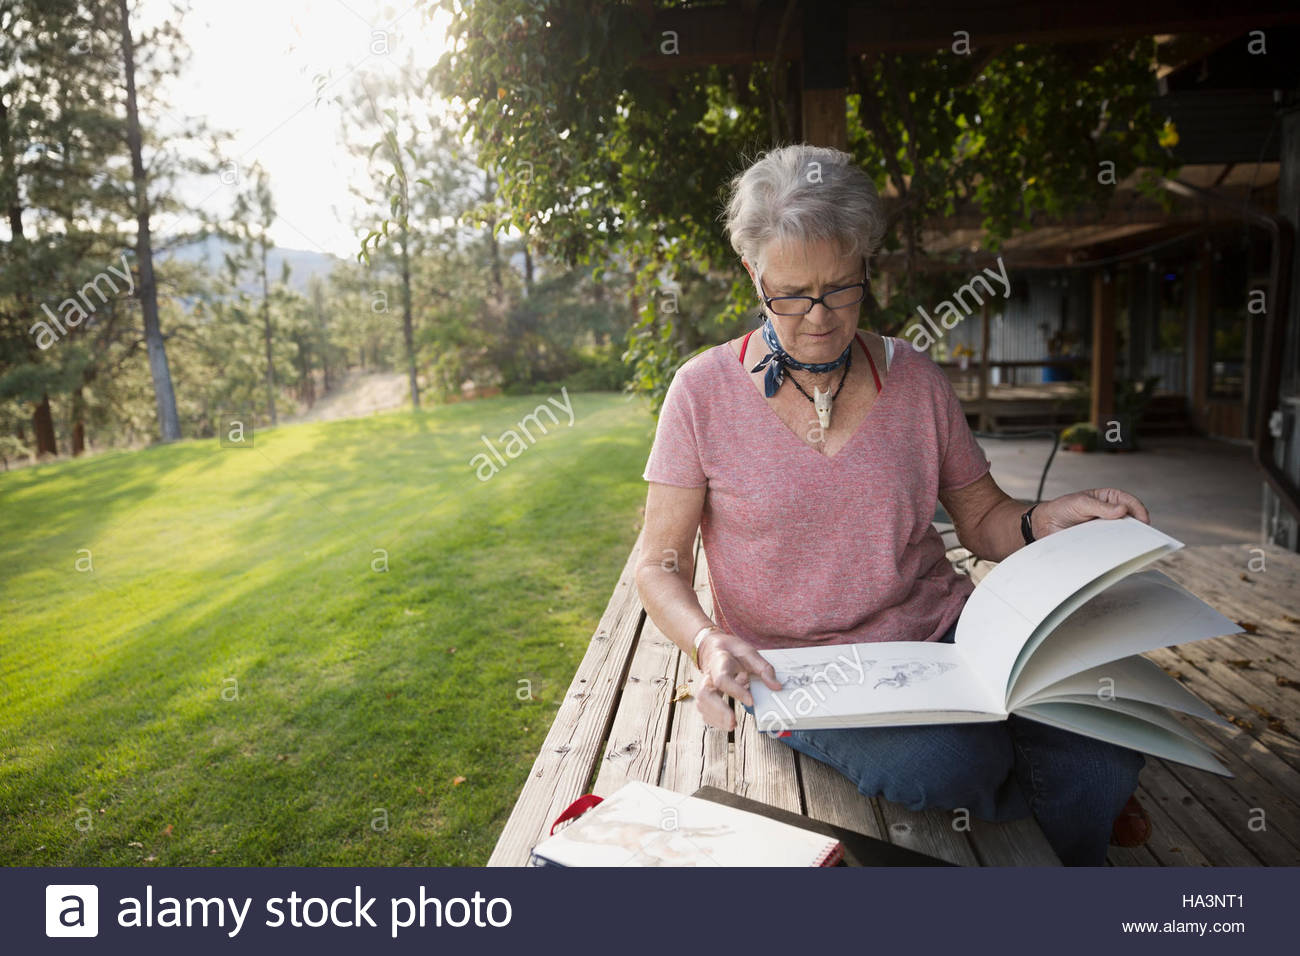 Senior woman artist with sketchbook on patio Stock Photo